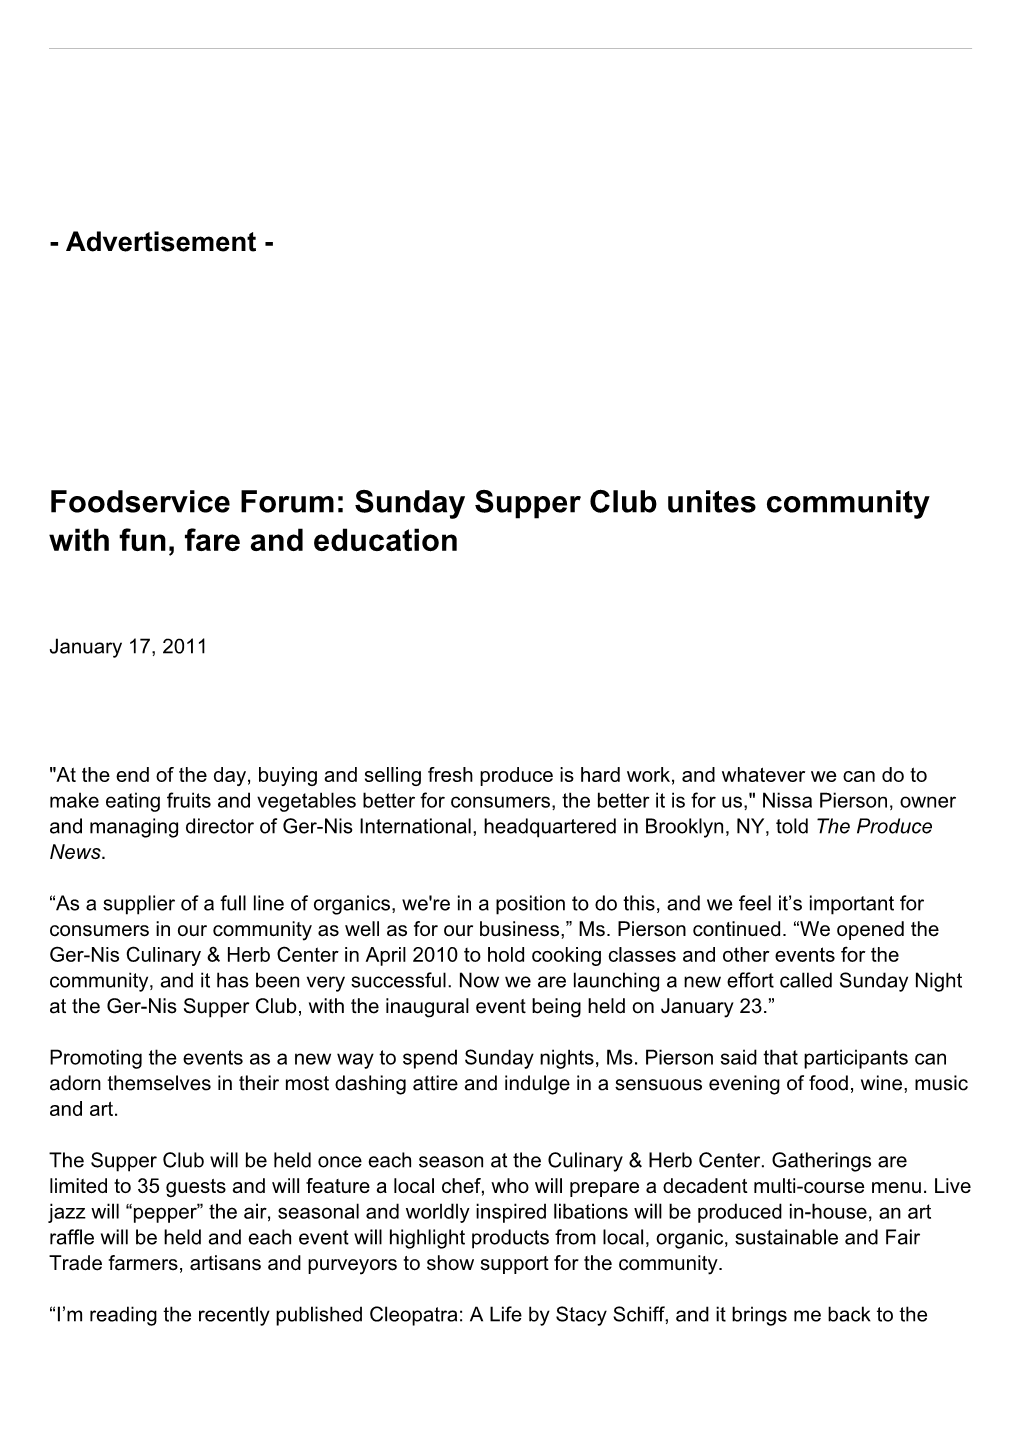 Foodservice Forum: Sunday Supper Club Unites Community with Fun, Fare and Education